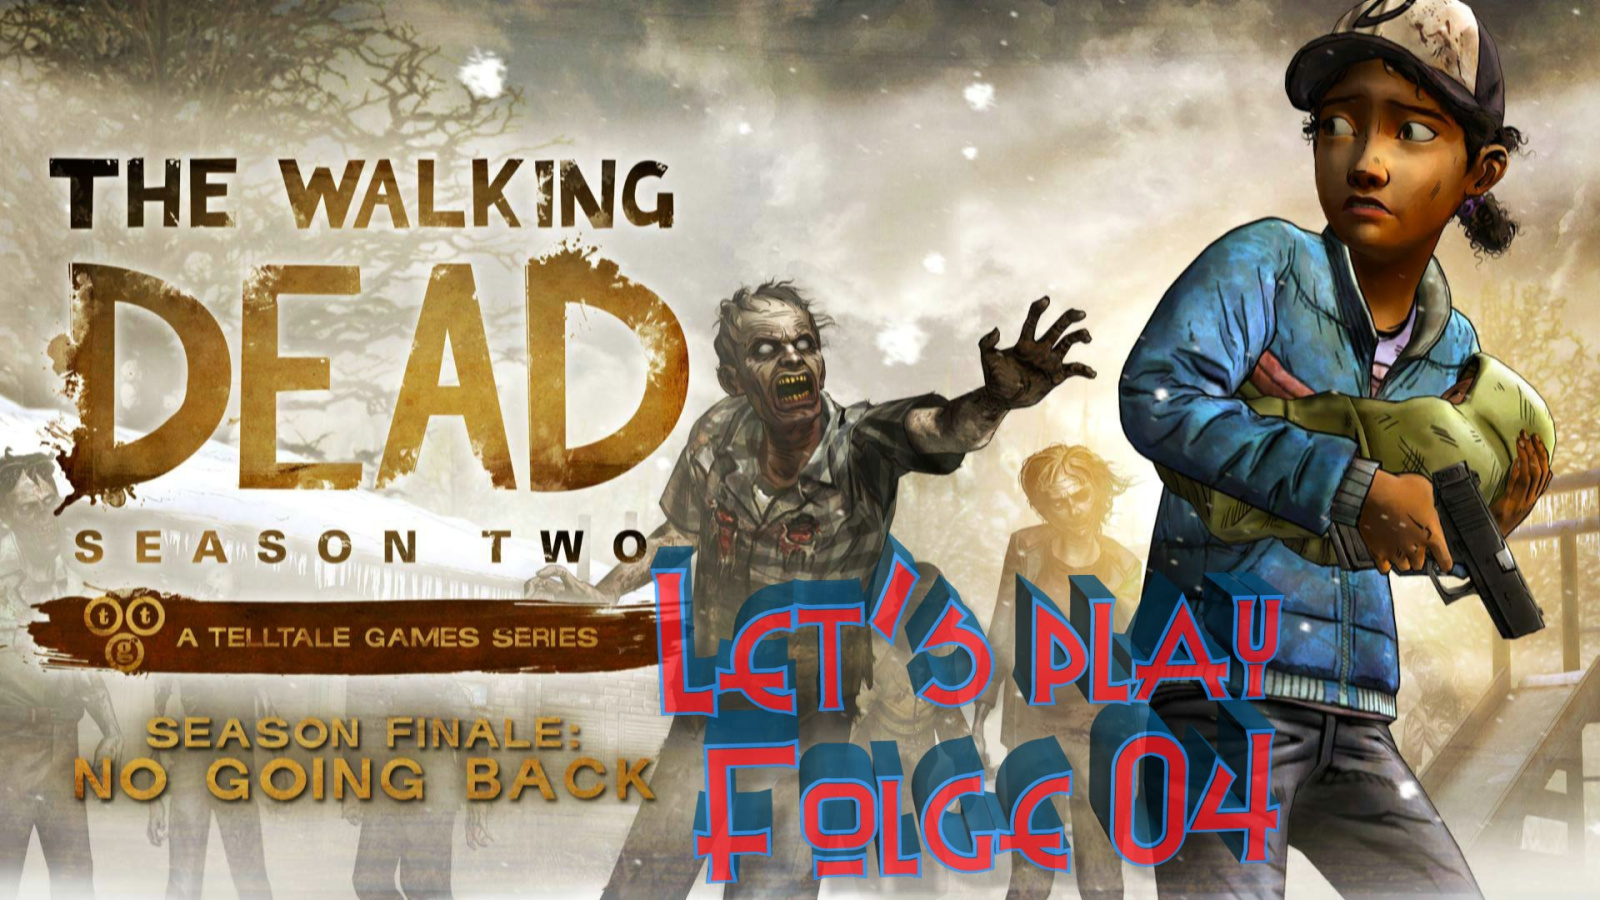 The Walking Dead: No Going Back – Let’s play 04